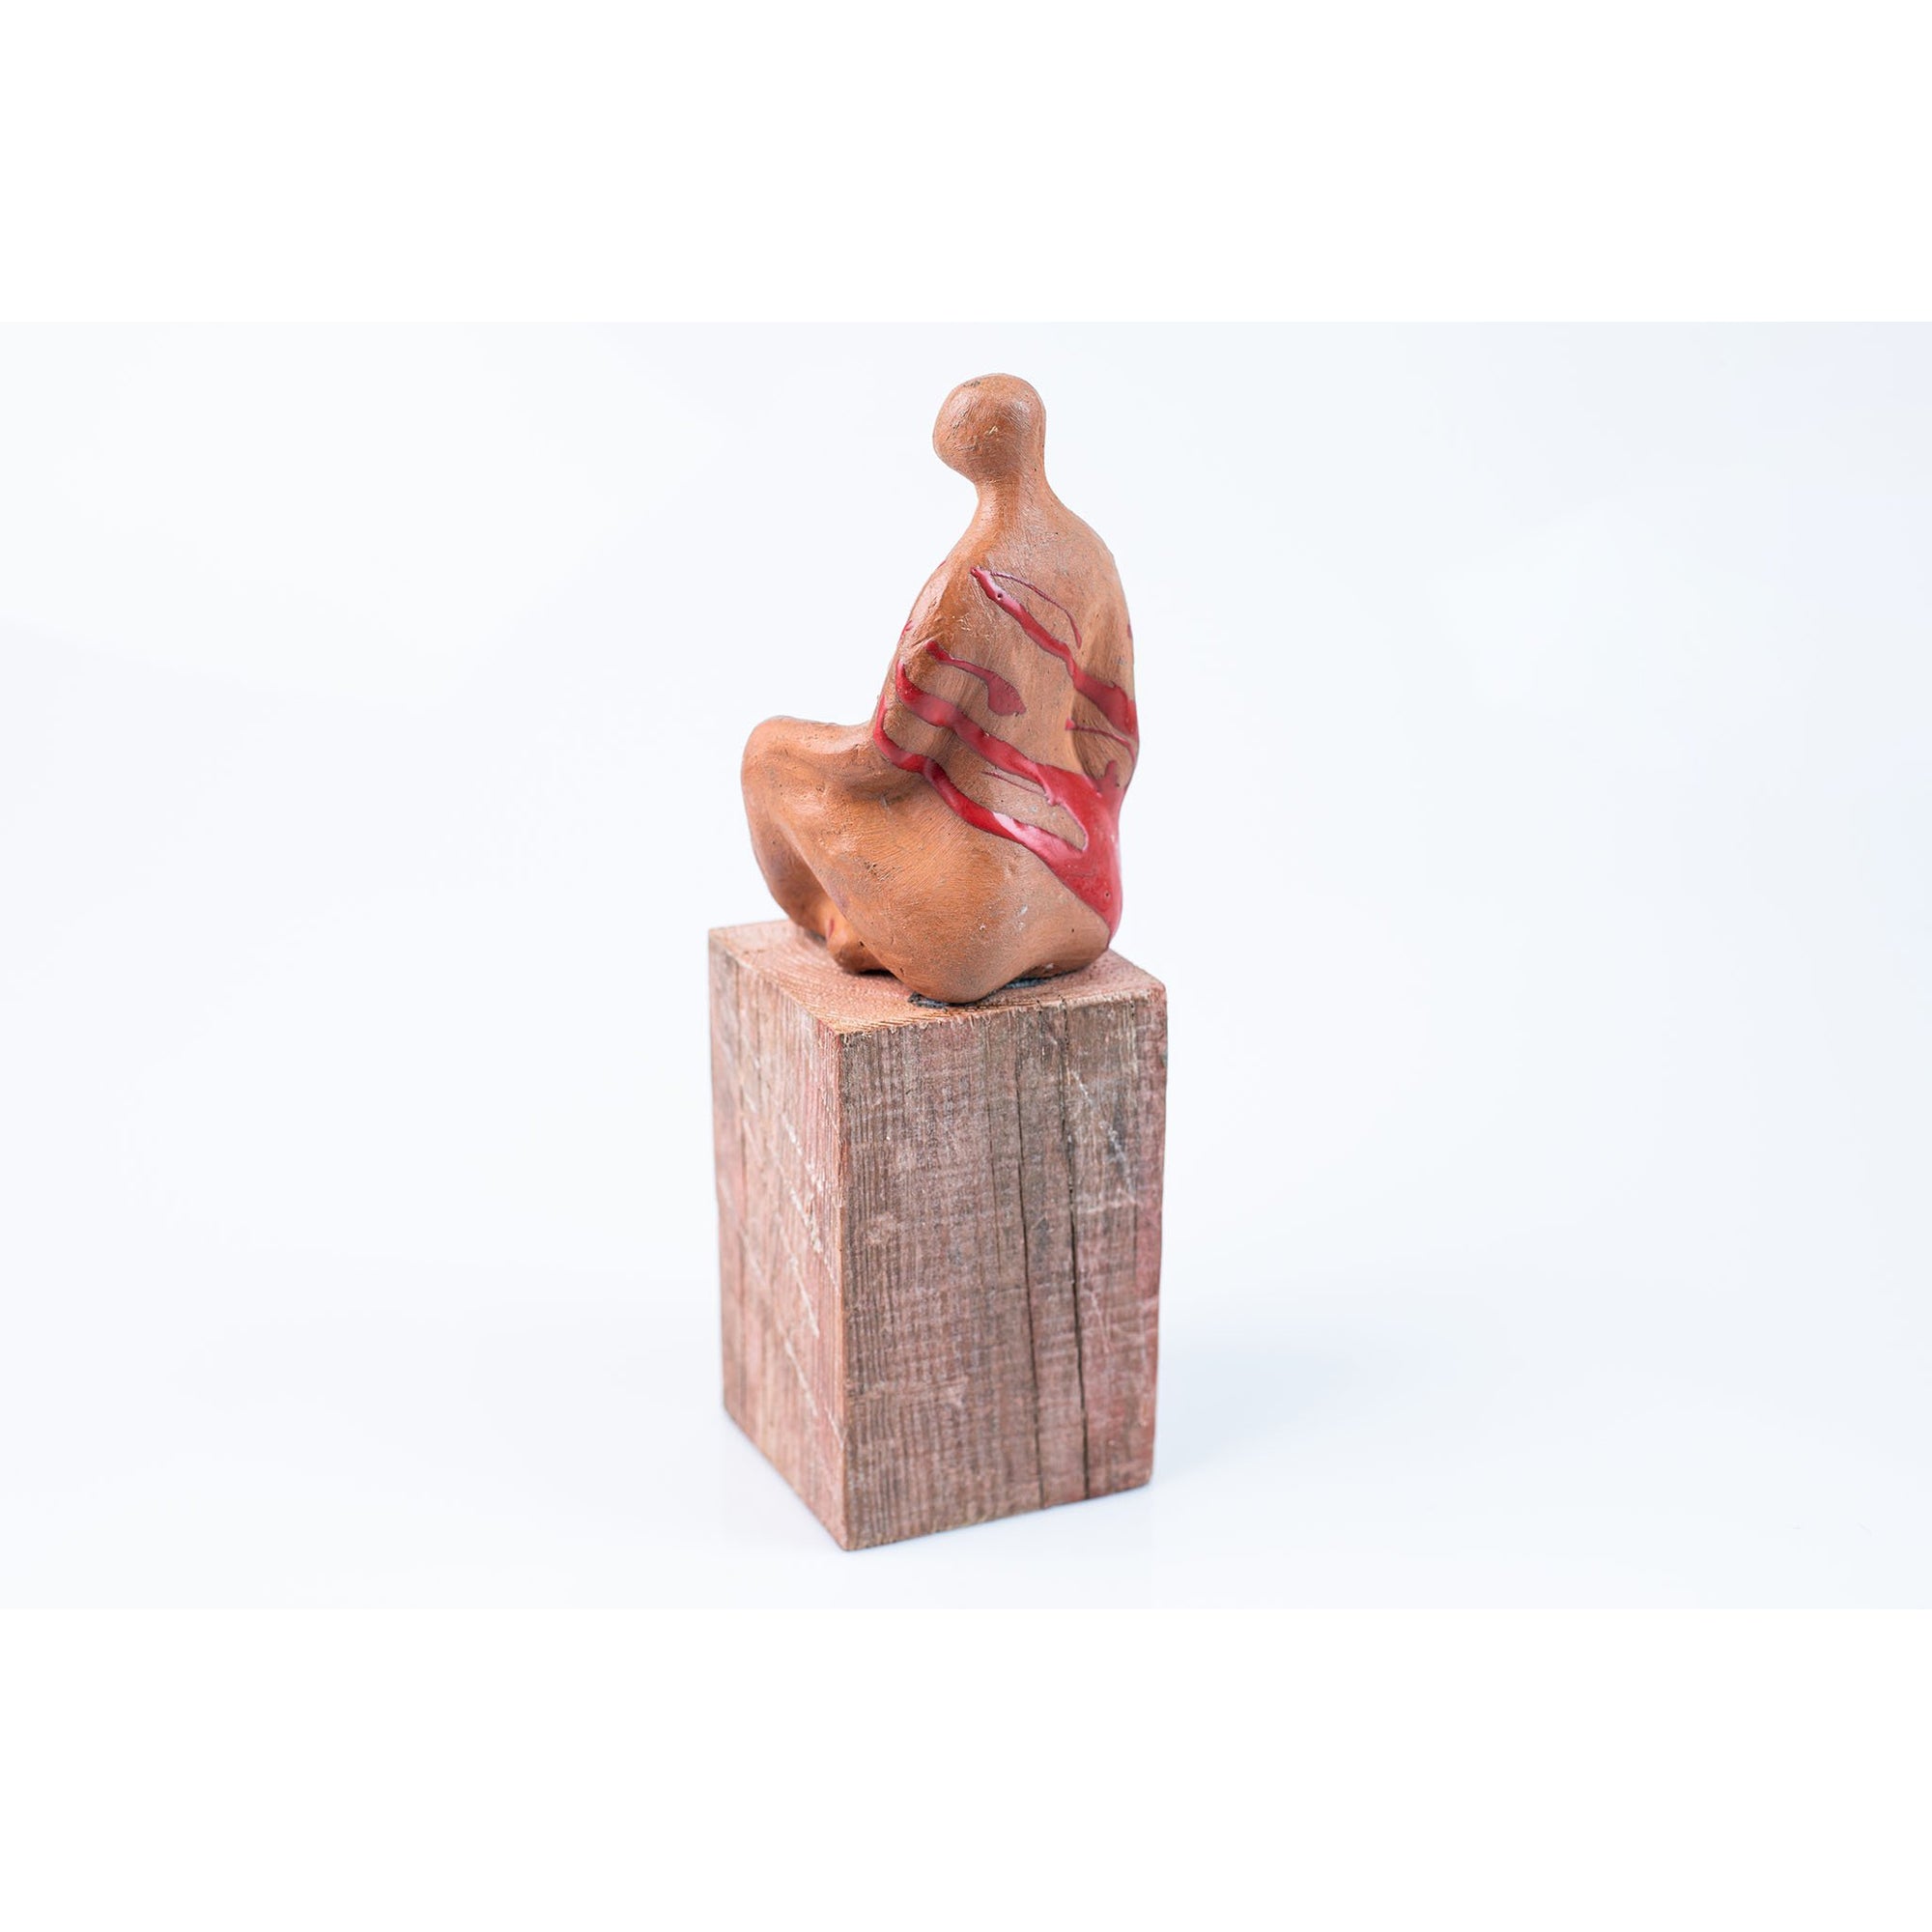 'Fem' seated figure on timber plinth, by Sophie Howard, available from Padstow Gallery, Cornwall